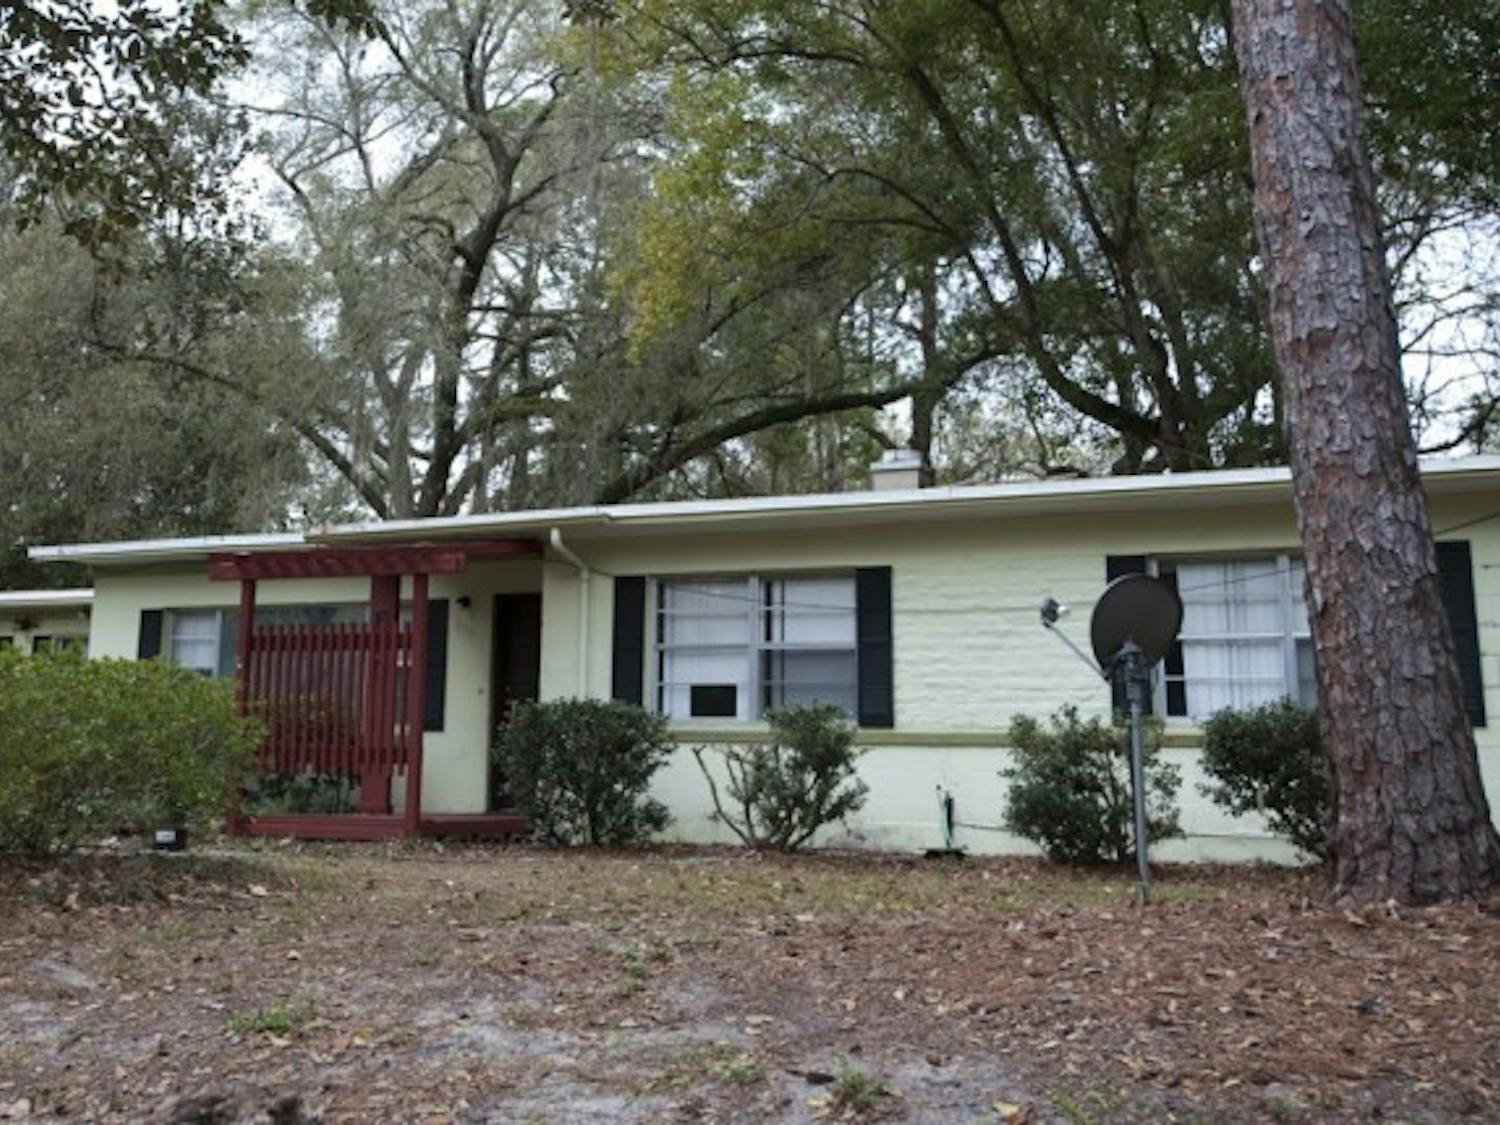 Alpha Phi Alpha’s fraternity house, located at 630 NW 36th St., is where nine UF students and one alumnus allegedly engaged in hazing.